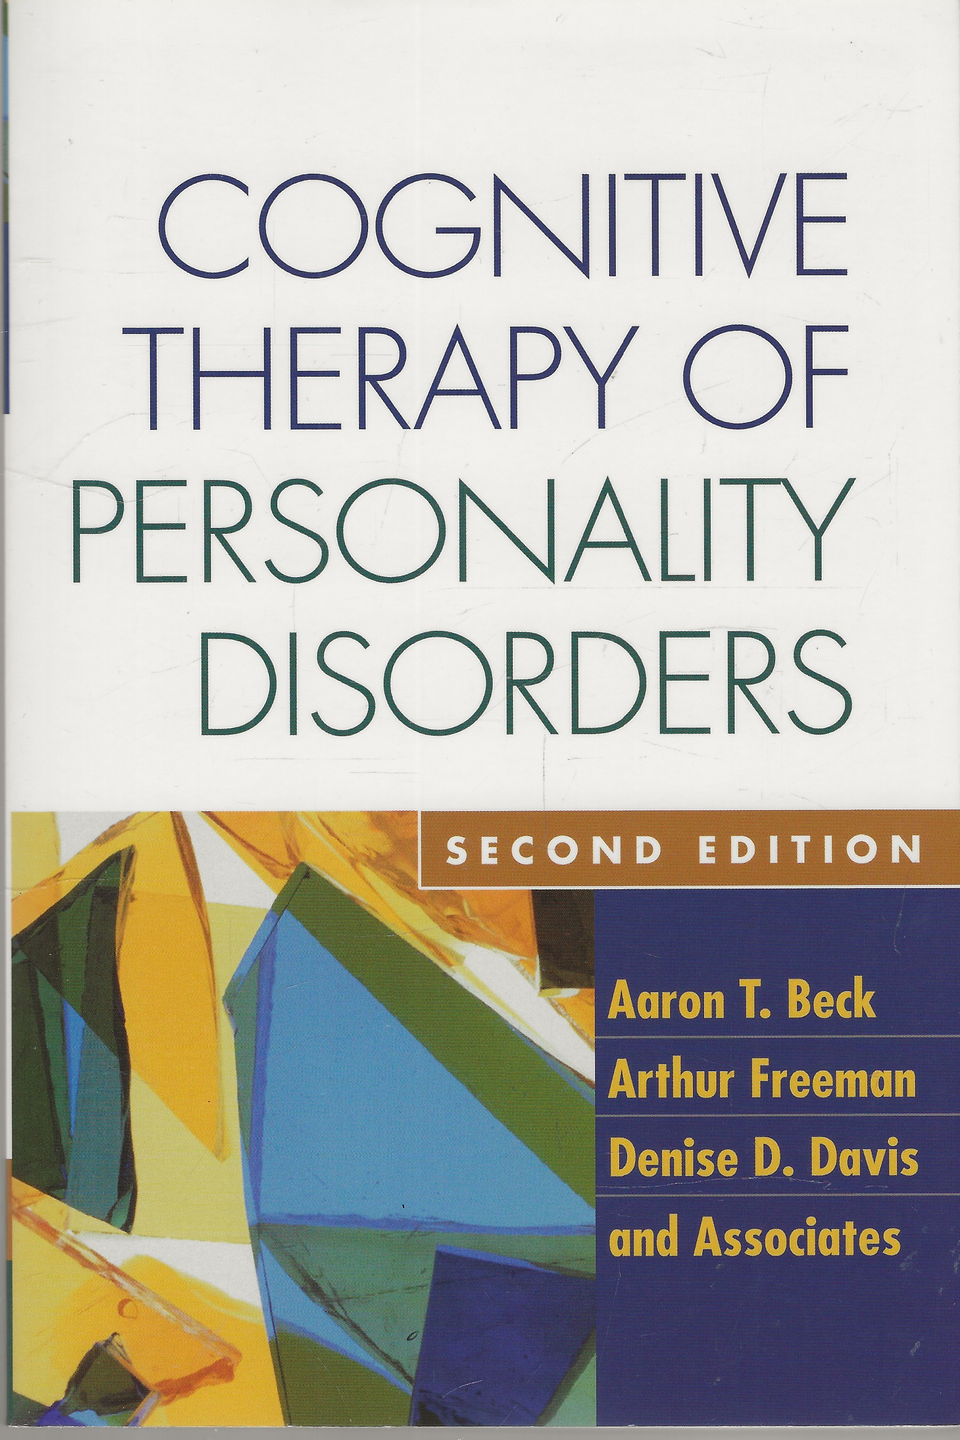 Cognitive therapy of personality disorders. Paperback edition. 2007